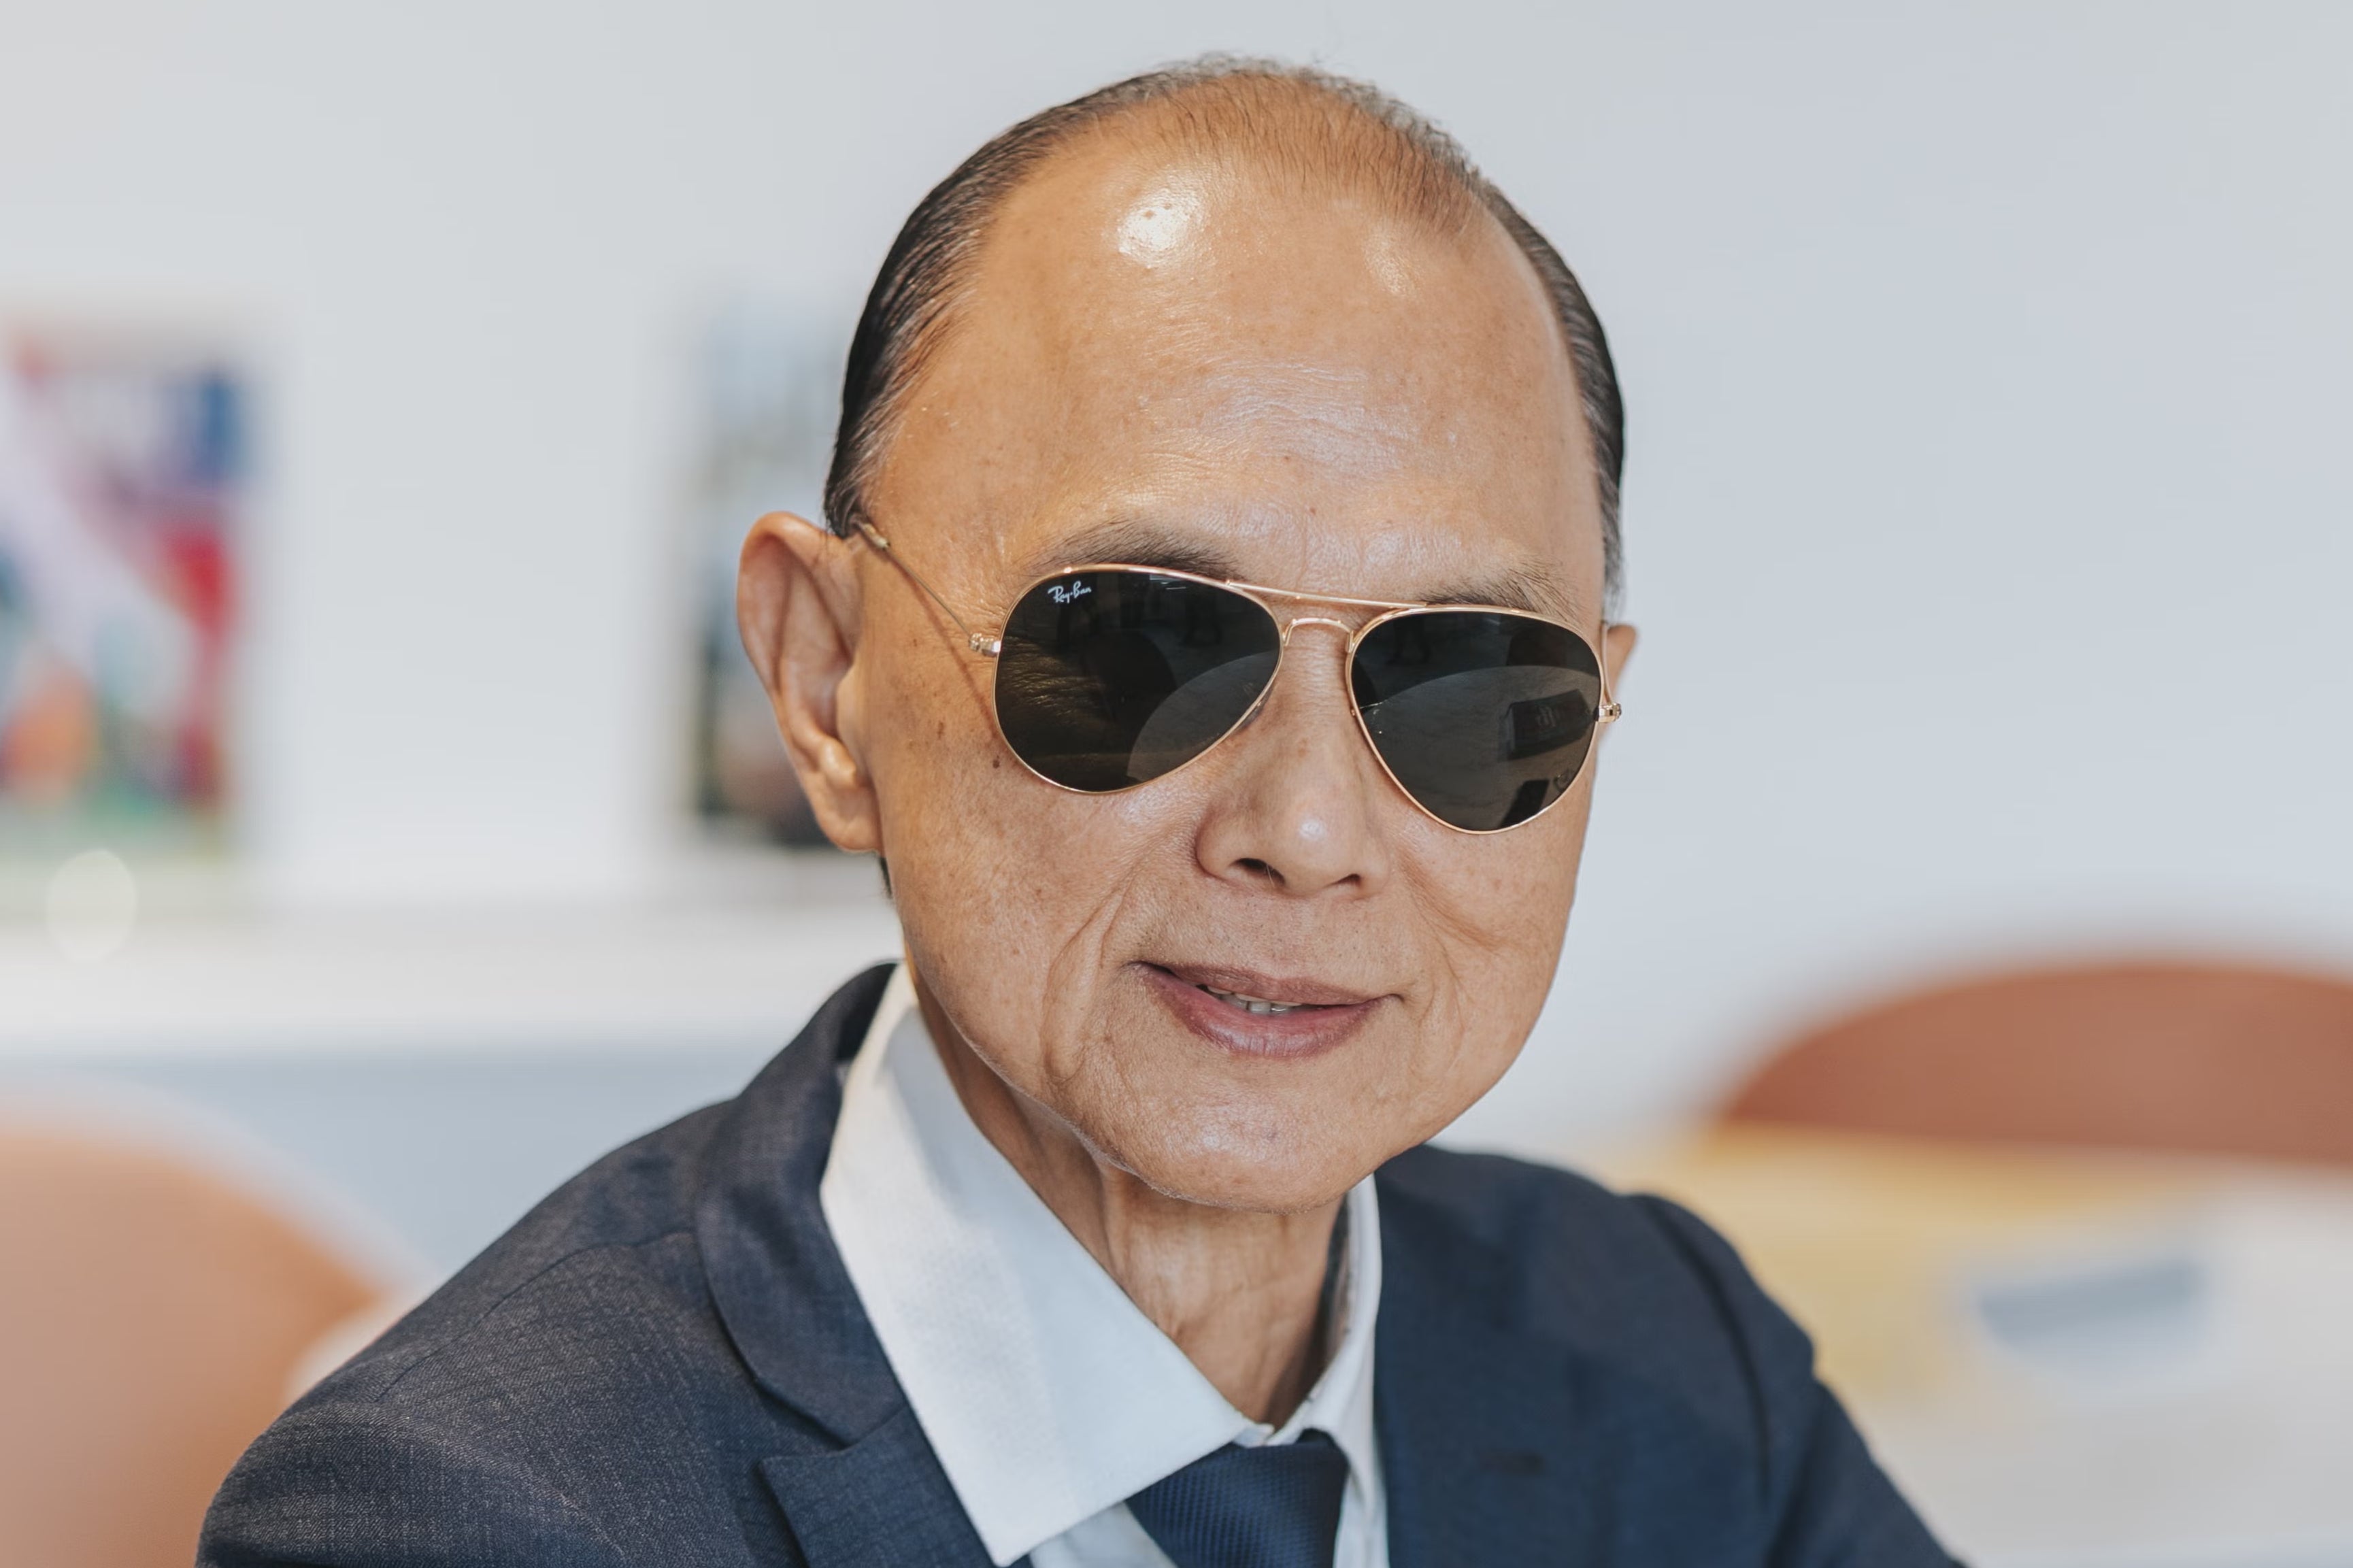 Since selling his 50 per cent stake in Jimmy Choo Ltd in 2001, the designer has embraced pastures new. He has founded his own fashion school, the Jimmy Choo Academy, or JCA for short